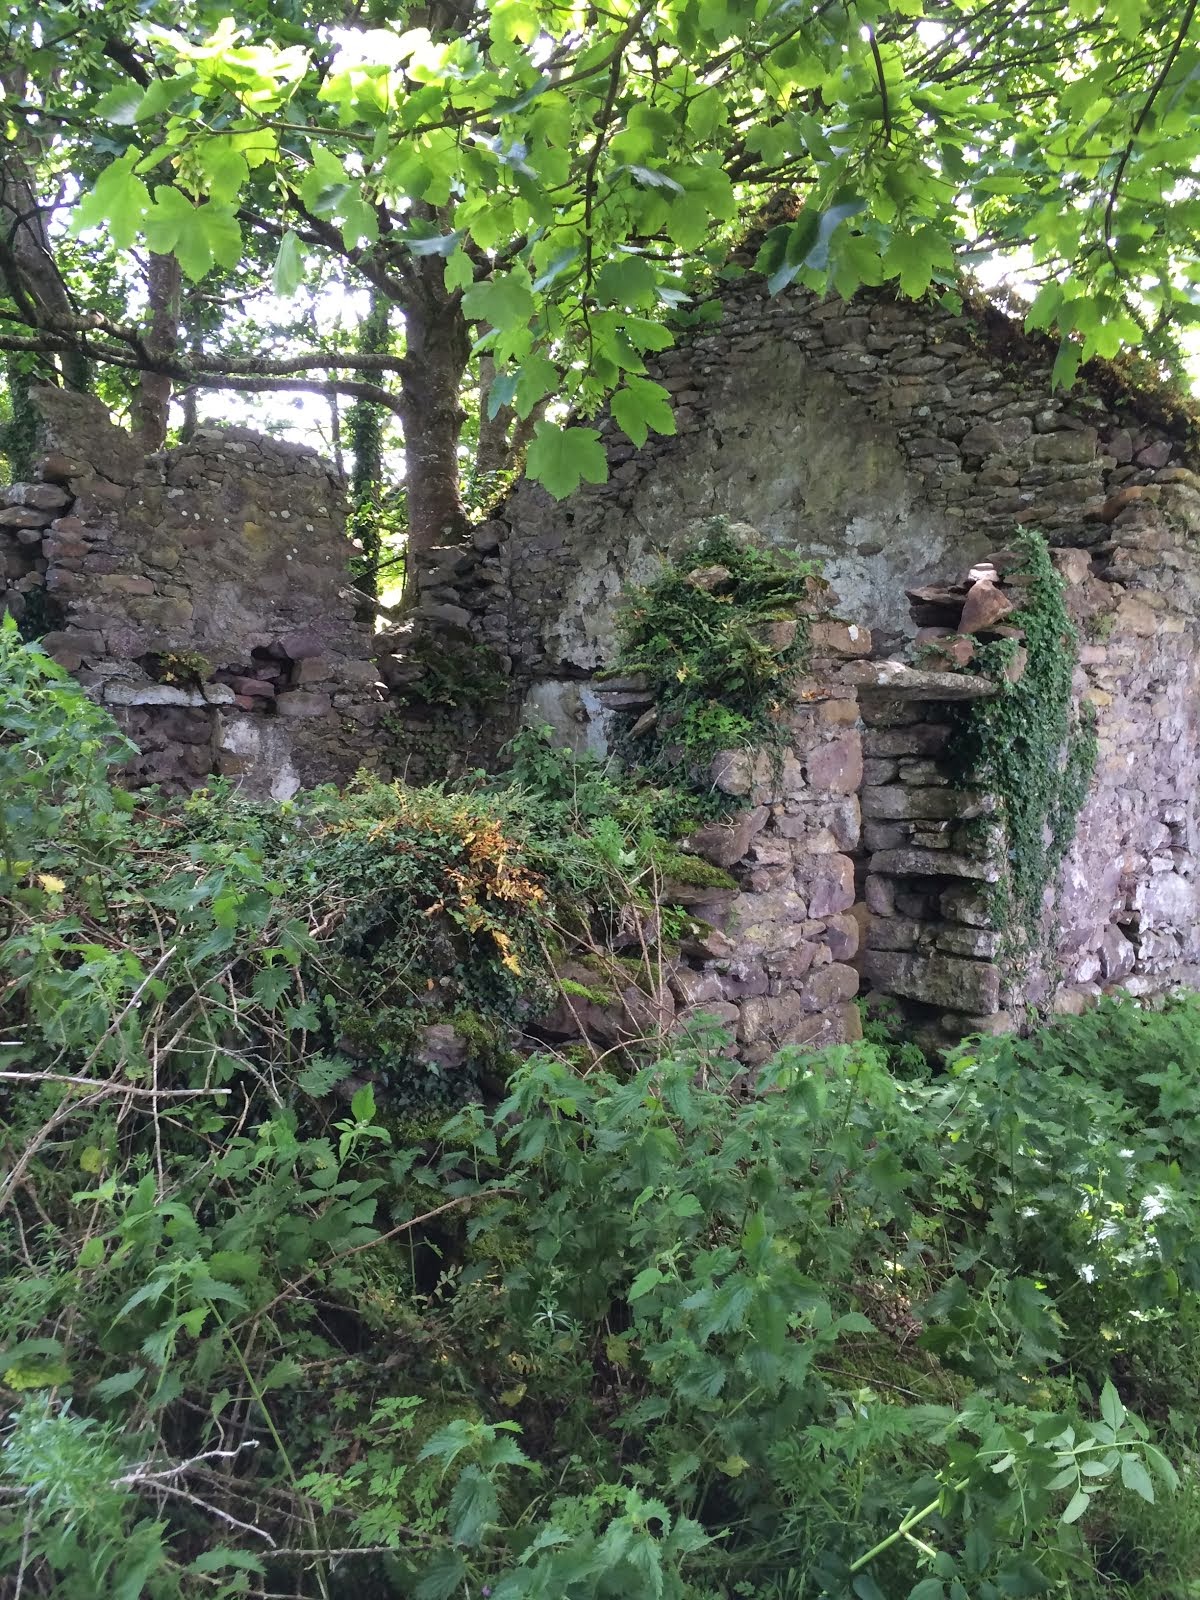 The ruins of a stone cottage